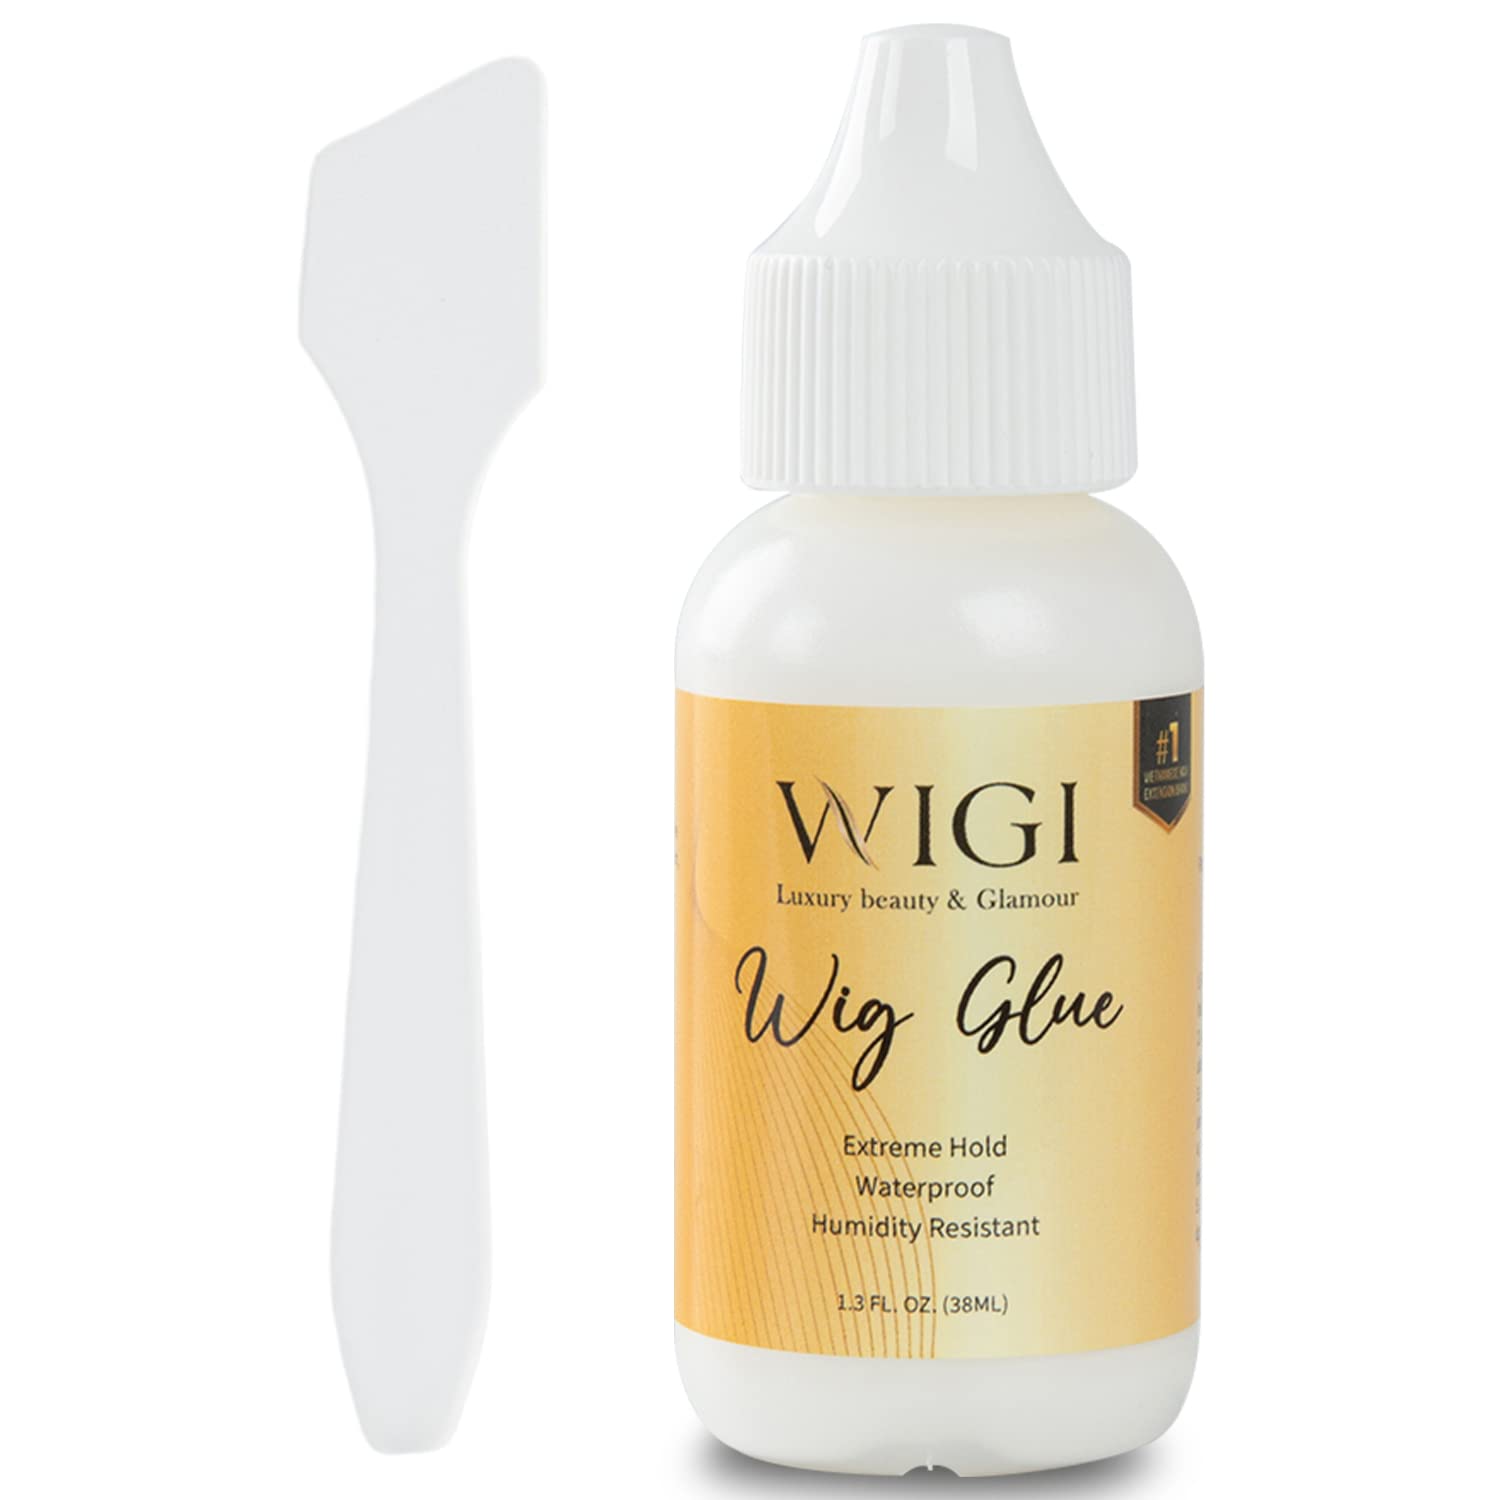 Wigi Premium Wig Glue 1.3 oz with Applicator Kit - Lace Glue Invisible, Strong Hold, Easy to Apply, Fast Drying, Waterproof - Hair Replacement